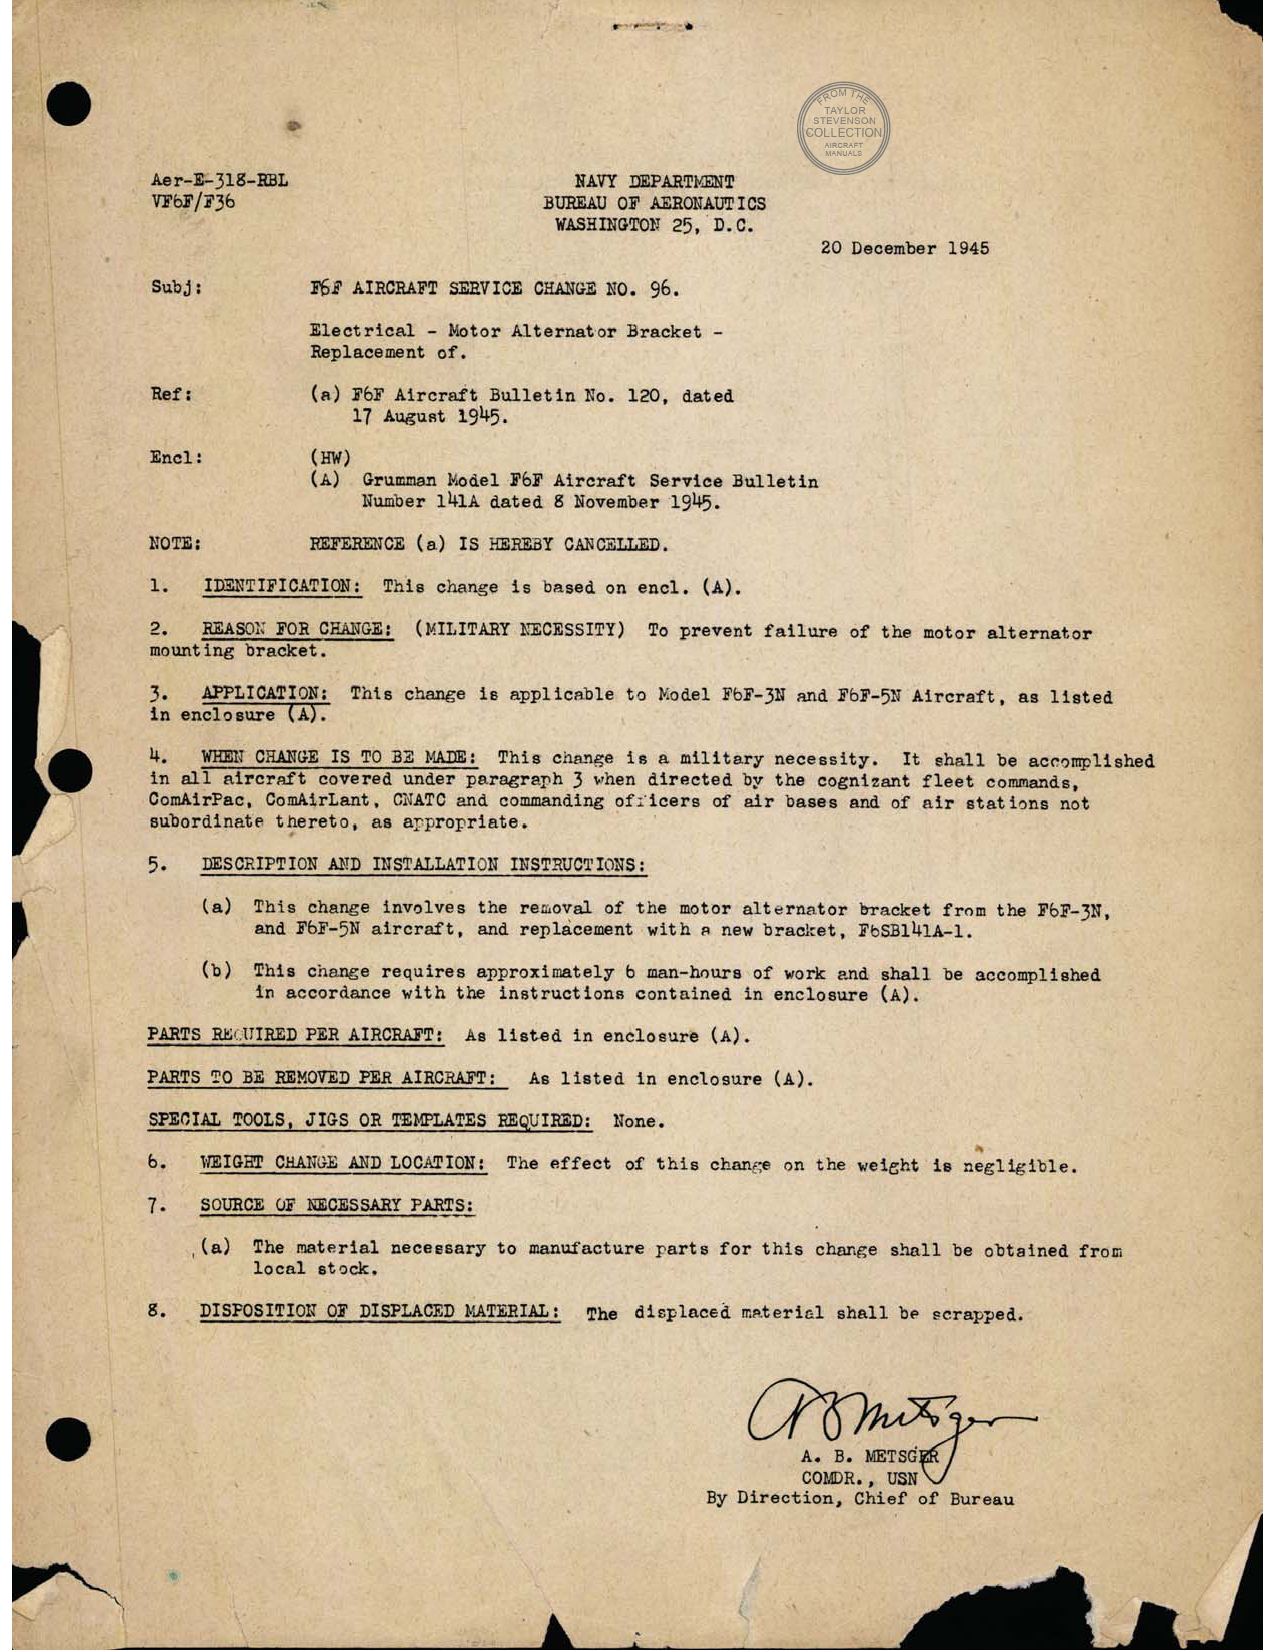 Sample page 1 from AirCorps Library document: Aircraft Service Changes - Navy Department Bureau of Aeronautics